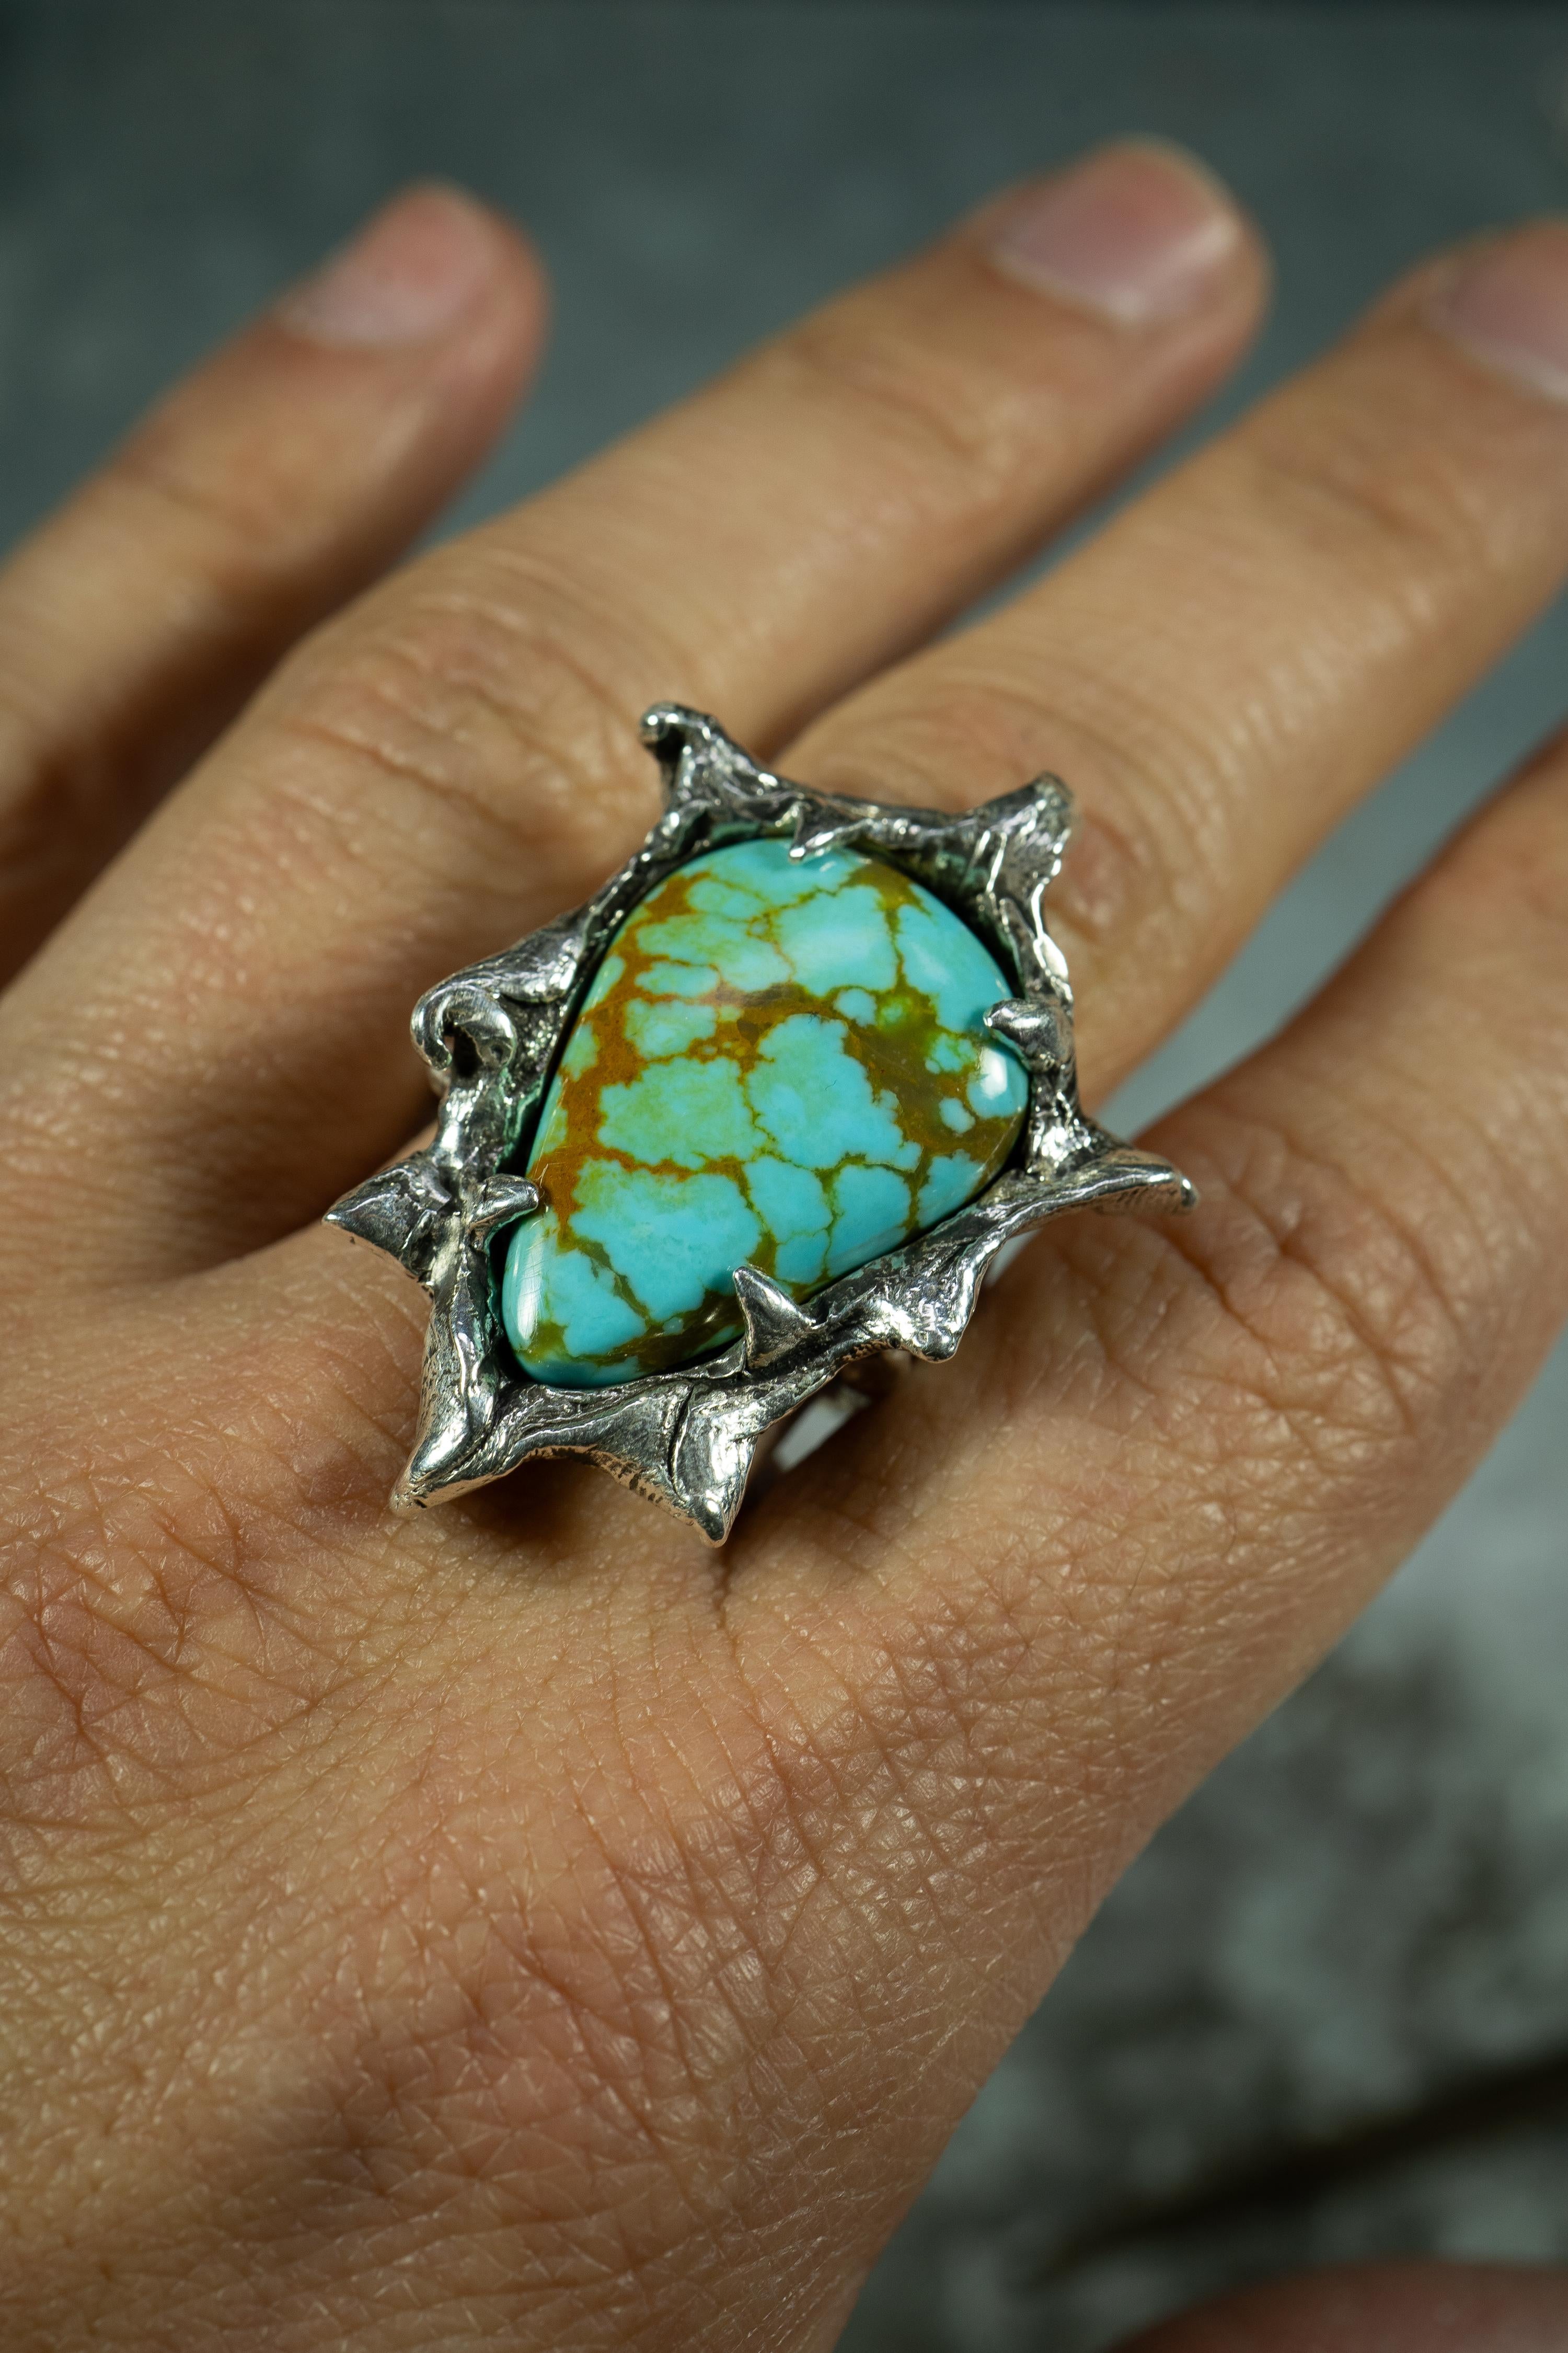 Genesis is a one-of-a-kind ring by Ken Fury that is hand-carved, cast in sterling silver, and features a Tyrone turquoise stone from New Mexico.

Ring Size: 10

Hand-signed